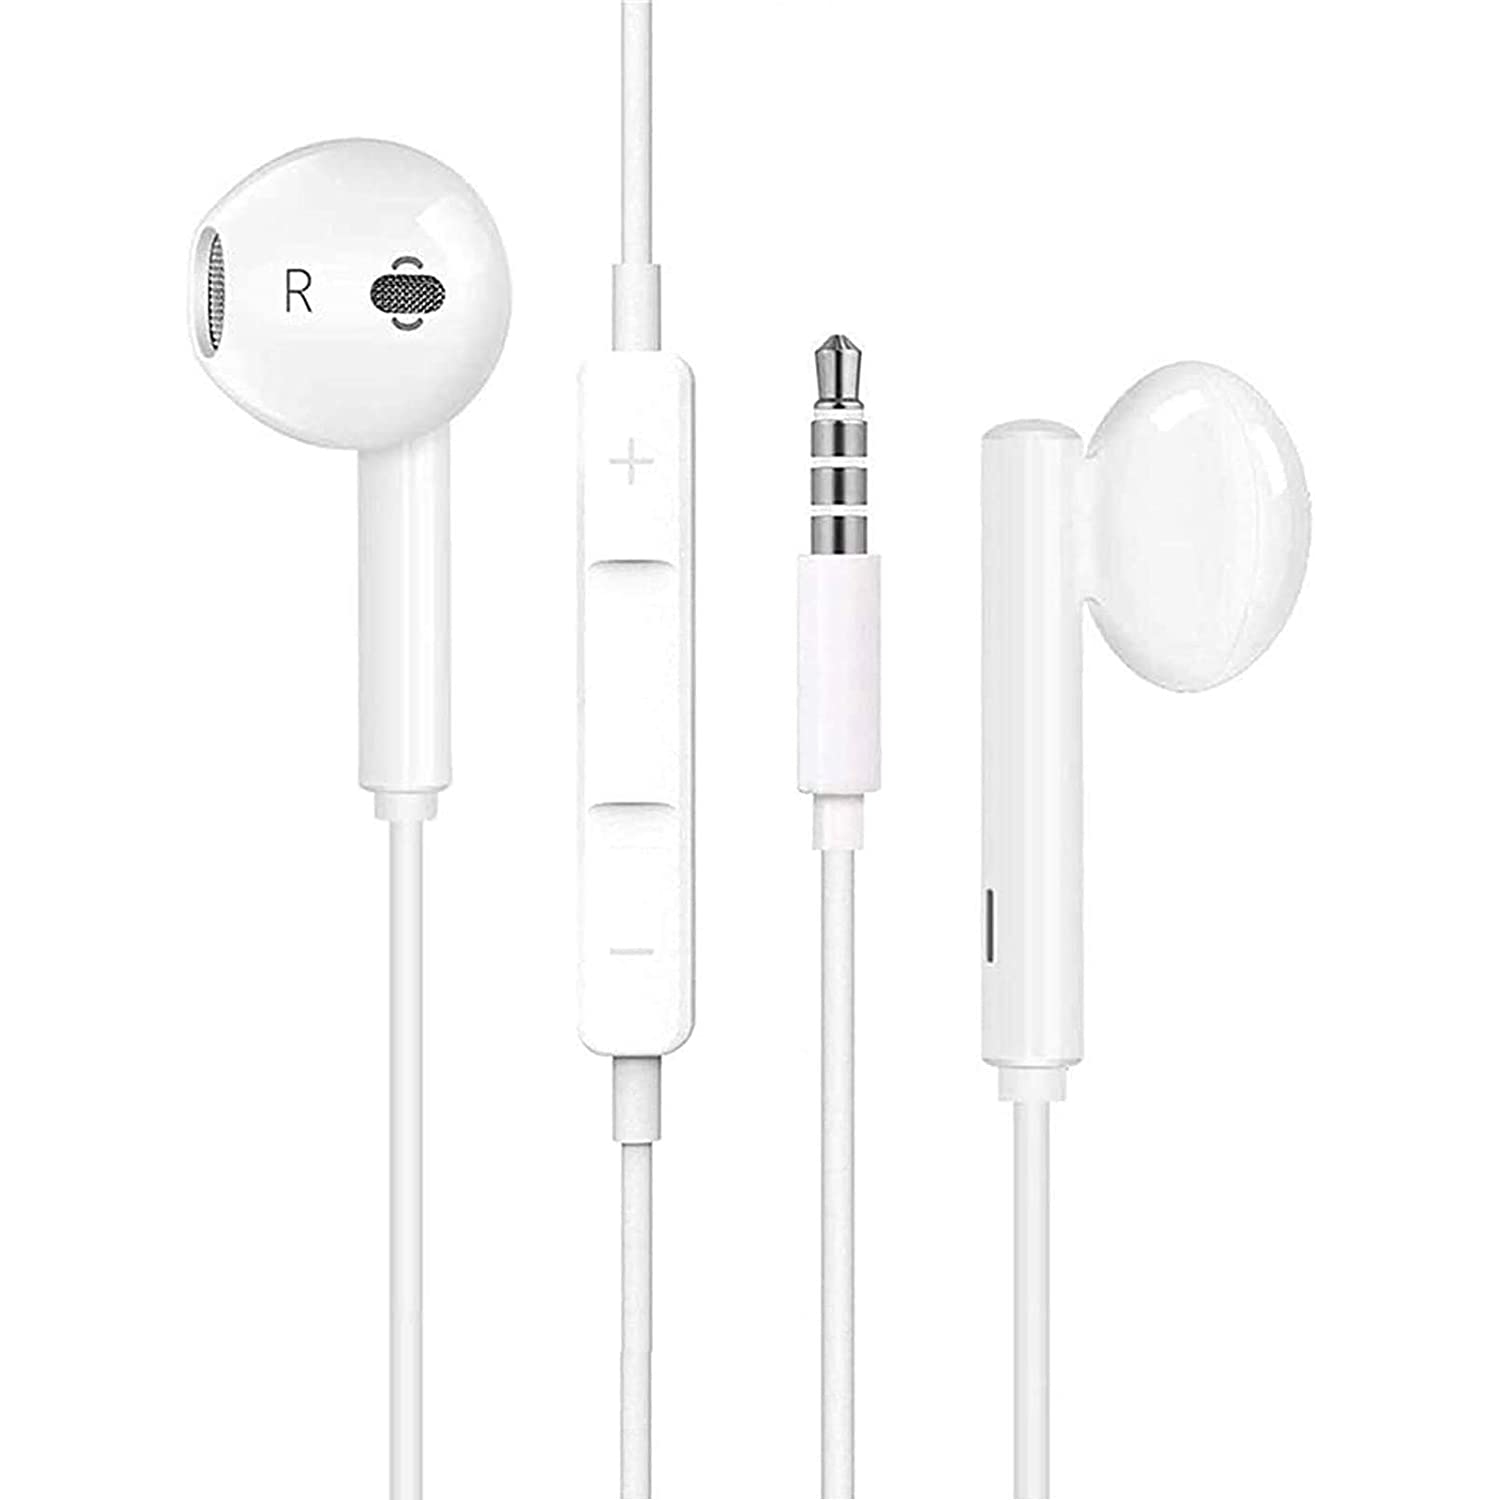 Dolaer Wired Earphones Stereo Sound in-Ear Earbuds, with 3.5mm Headphones Plug Microphone Volume Control for Sports Workout Compatible, with iPhone Android, MP3/4,PC, HUAWEI,Samsun